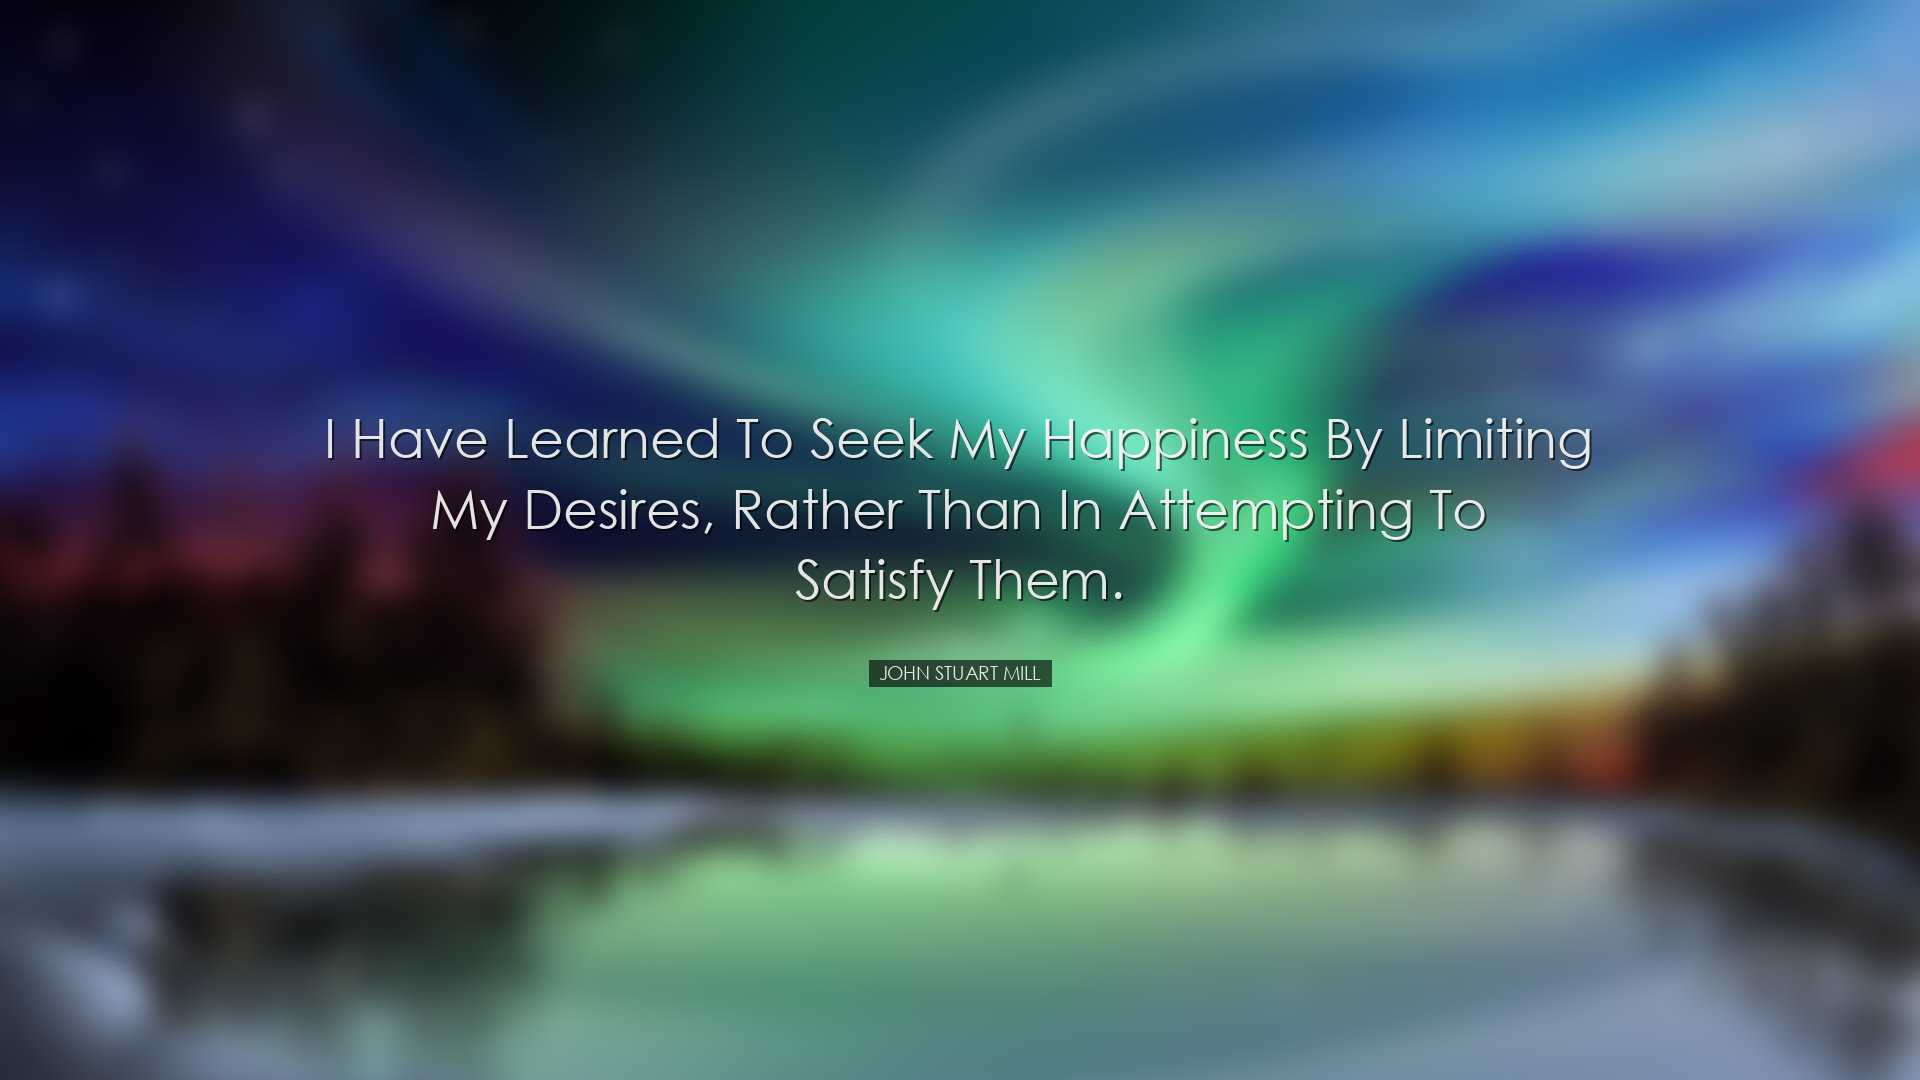 I have learned to seek my happiness by limiting my desires, rather